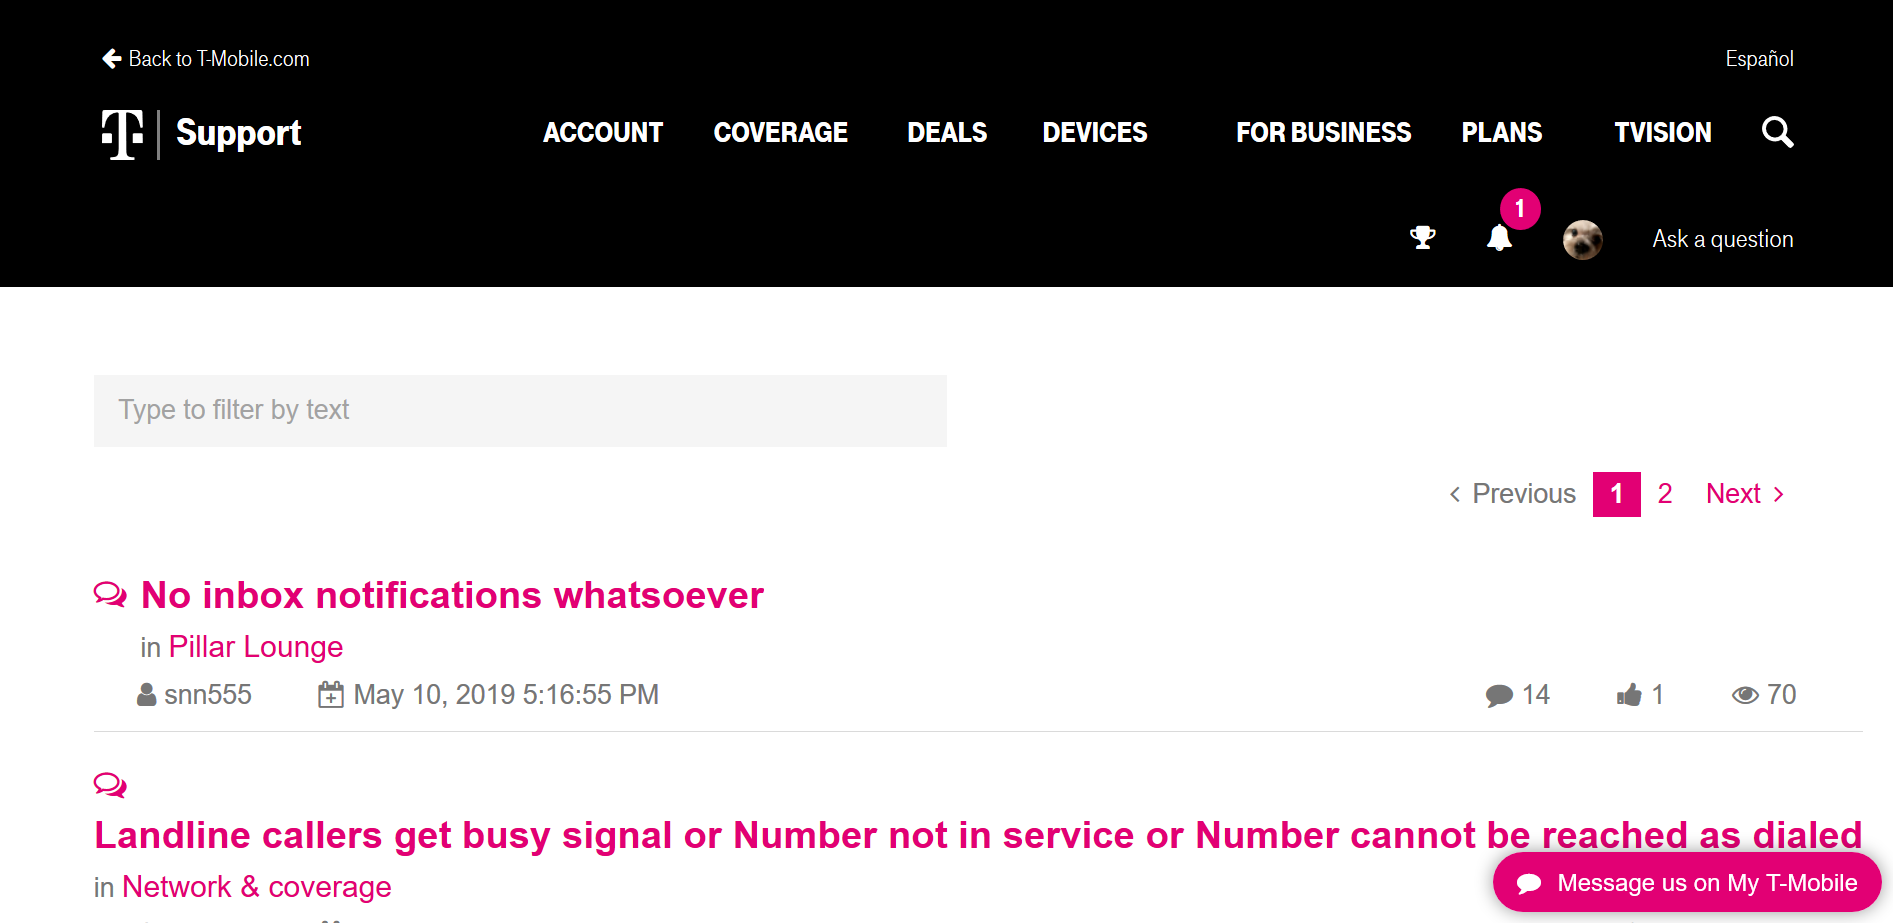 T mobile live chat usa